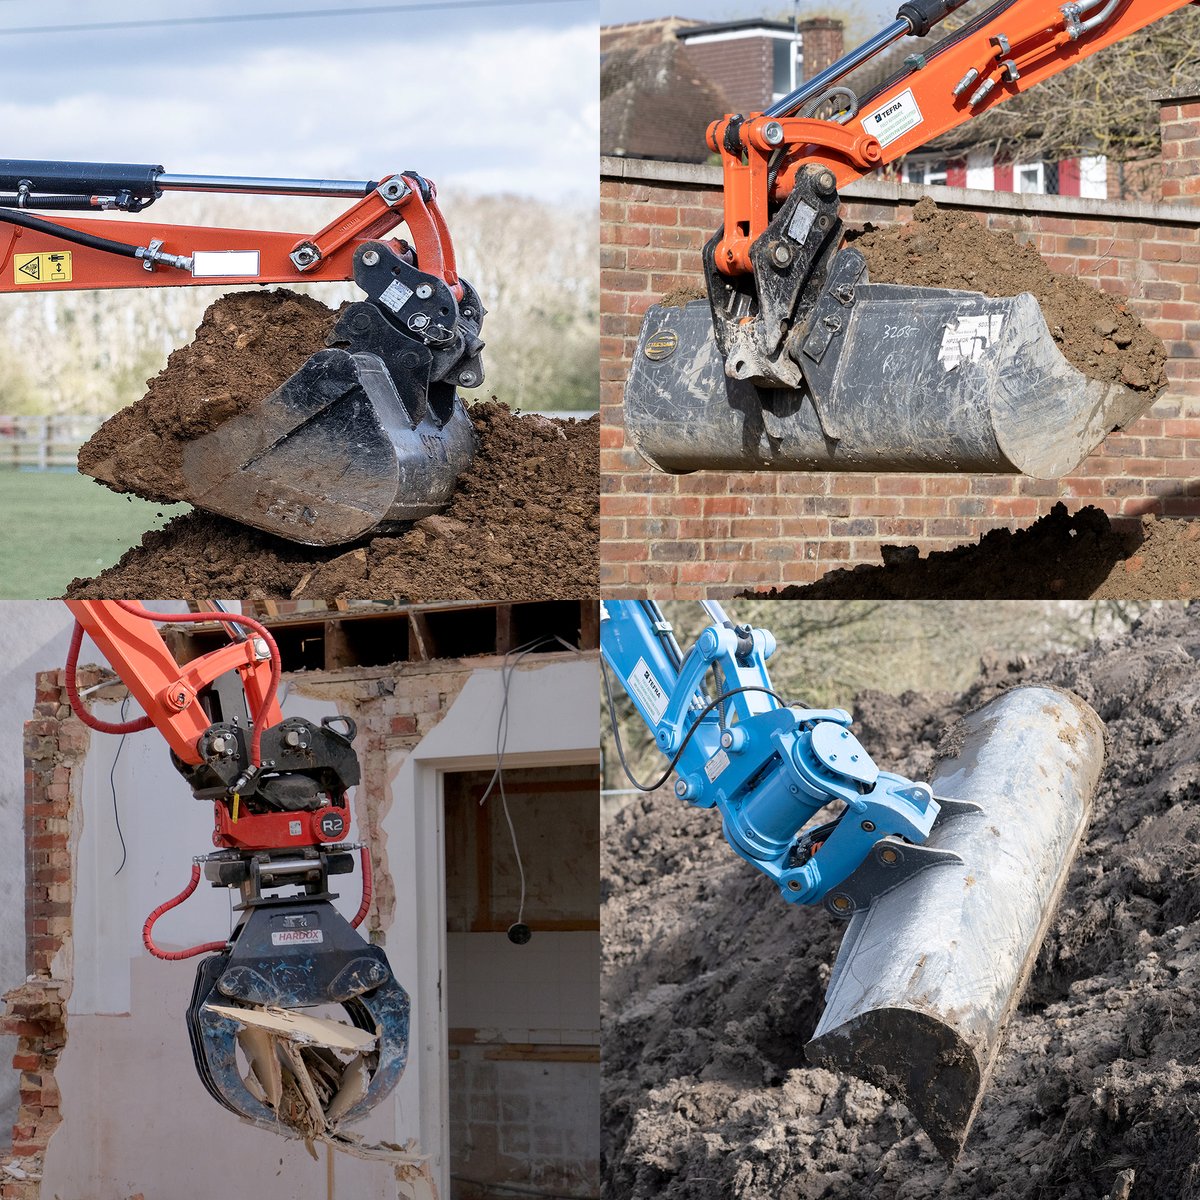 We supply hundreds of buckets a year, in all shapes & sizes.
But we can also supply quick hitches, tilt rotators, grabs, & breakers.

Contact us for more info?

bossplantsales.co.uk

#versatility #attachments #righttoolforthejob